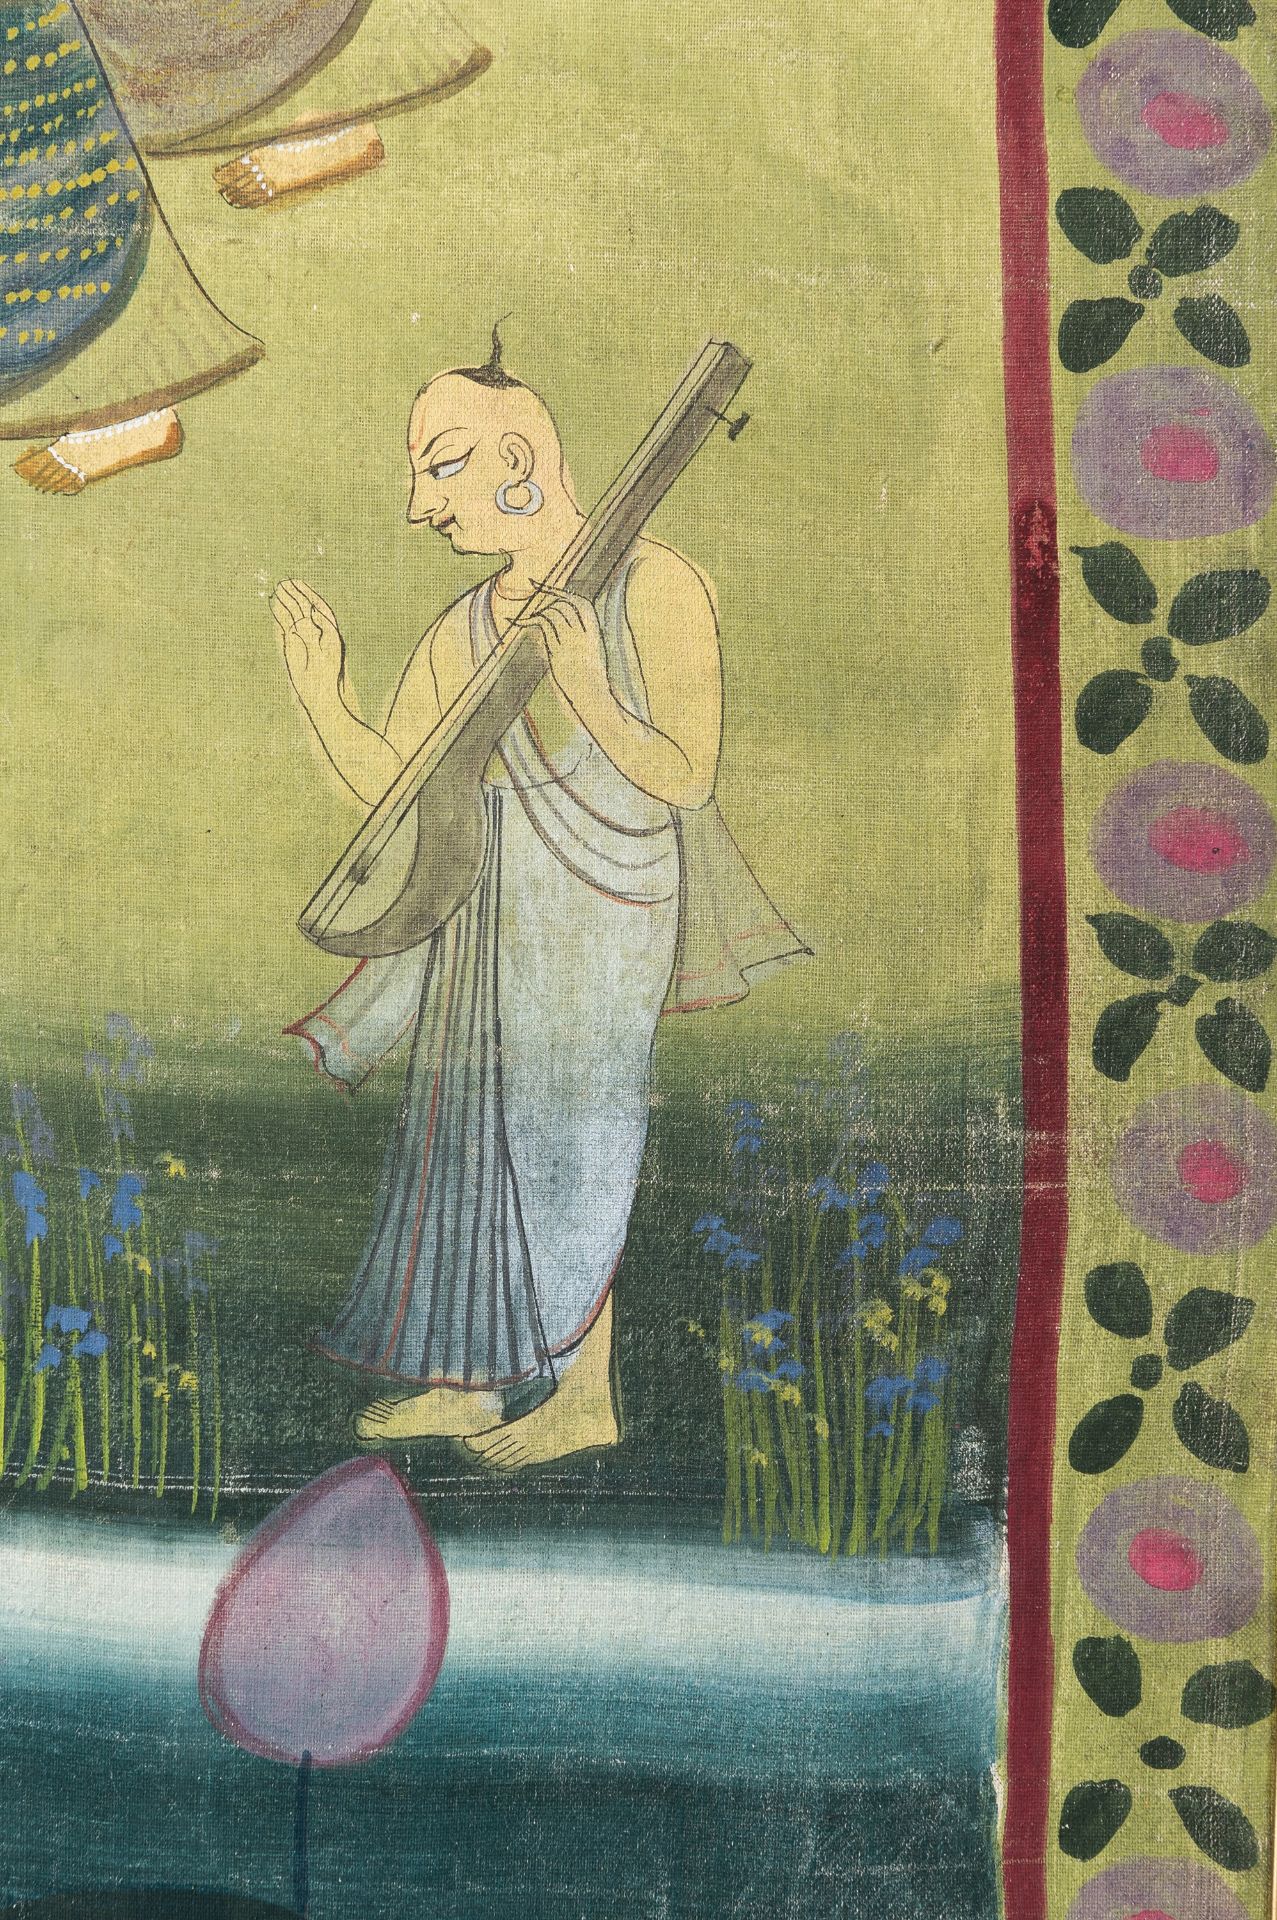 A LARGE AND FINE PICHWAI PAINTING OF THE RASA LILA - Image 7 of 8